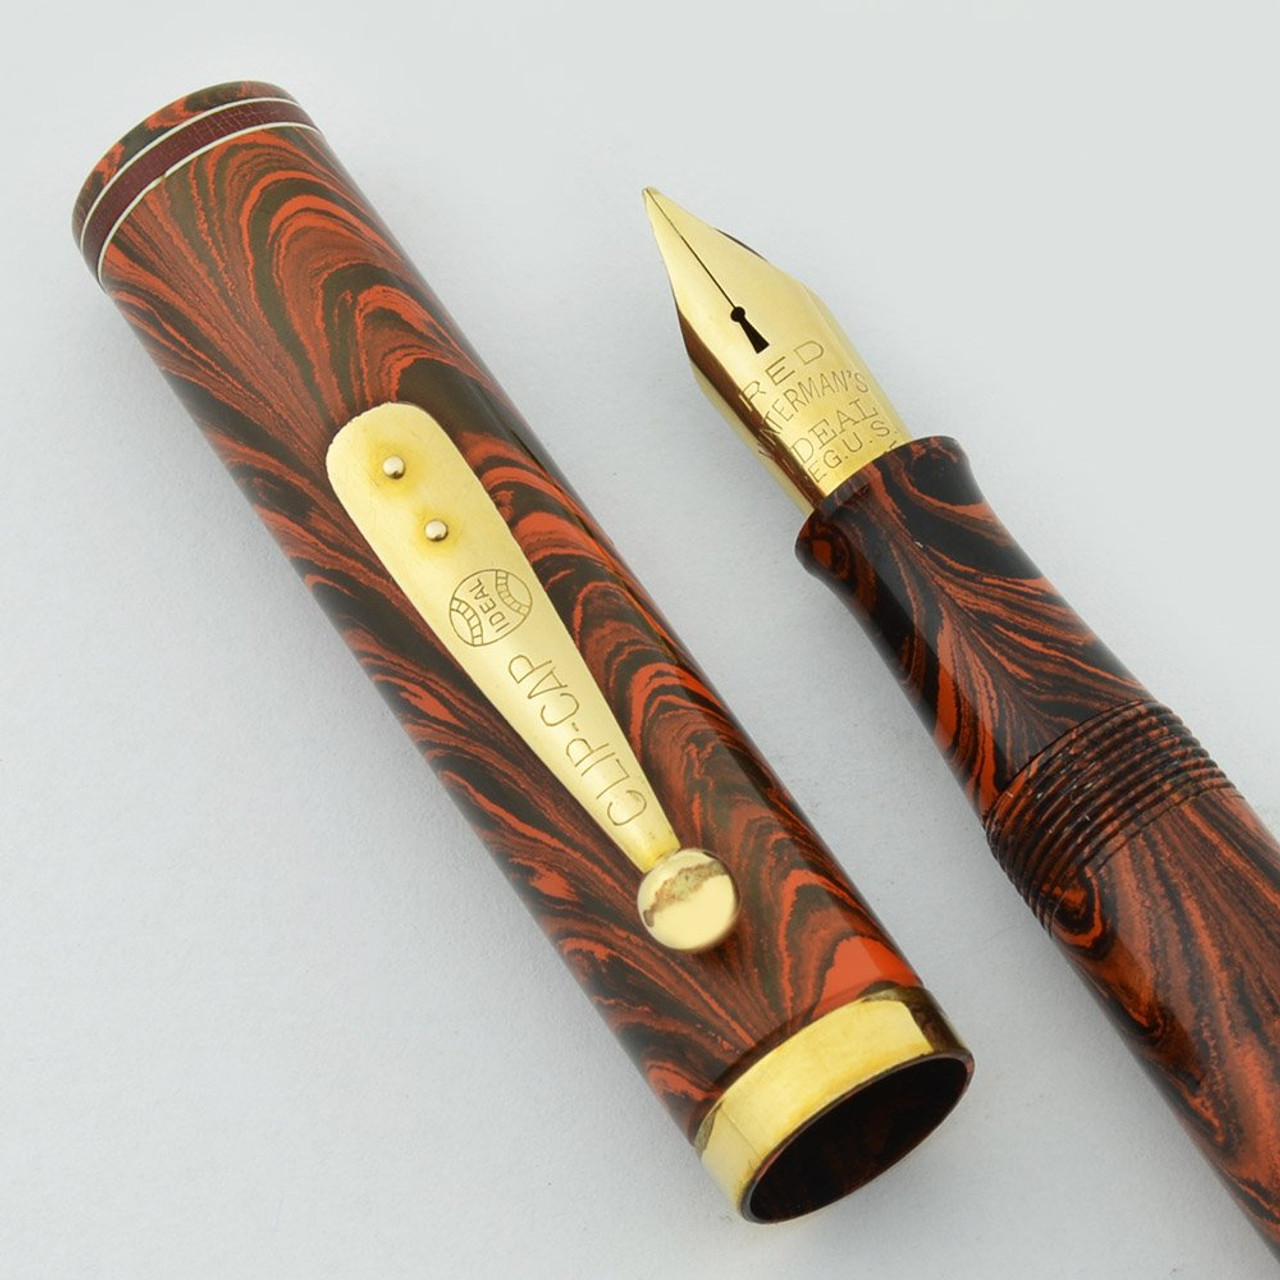 Waterman 7 Colorband Red Ripple Fountain Pen - Flexible Fine "Red" Nib (Excellent, Restored)